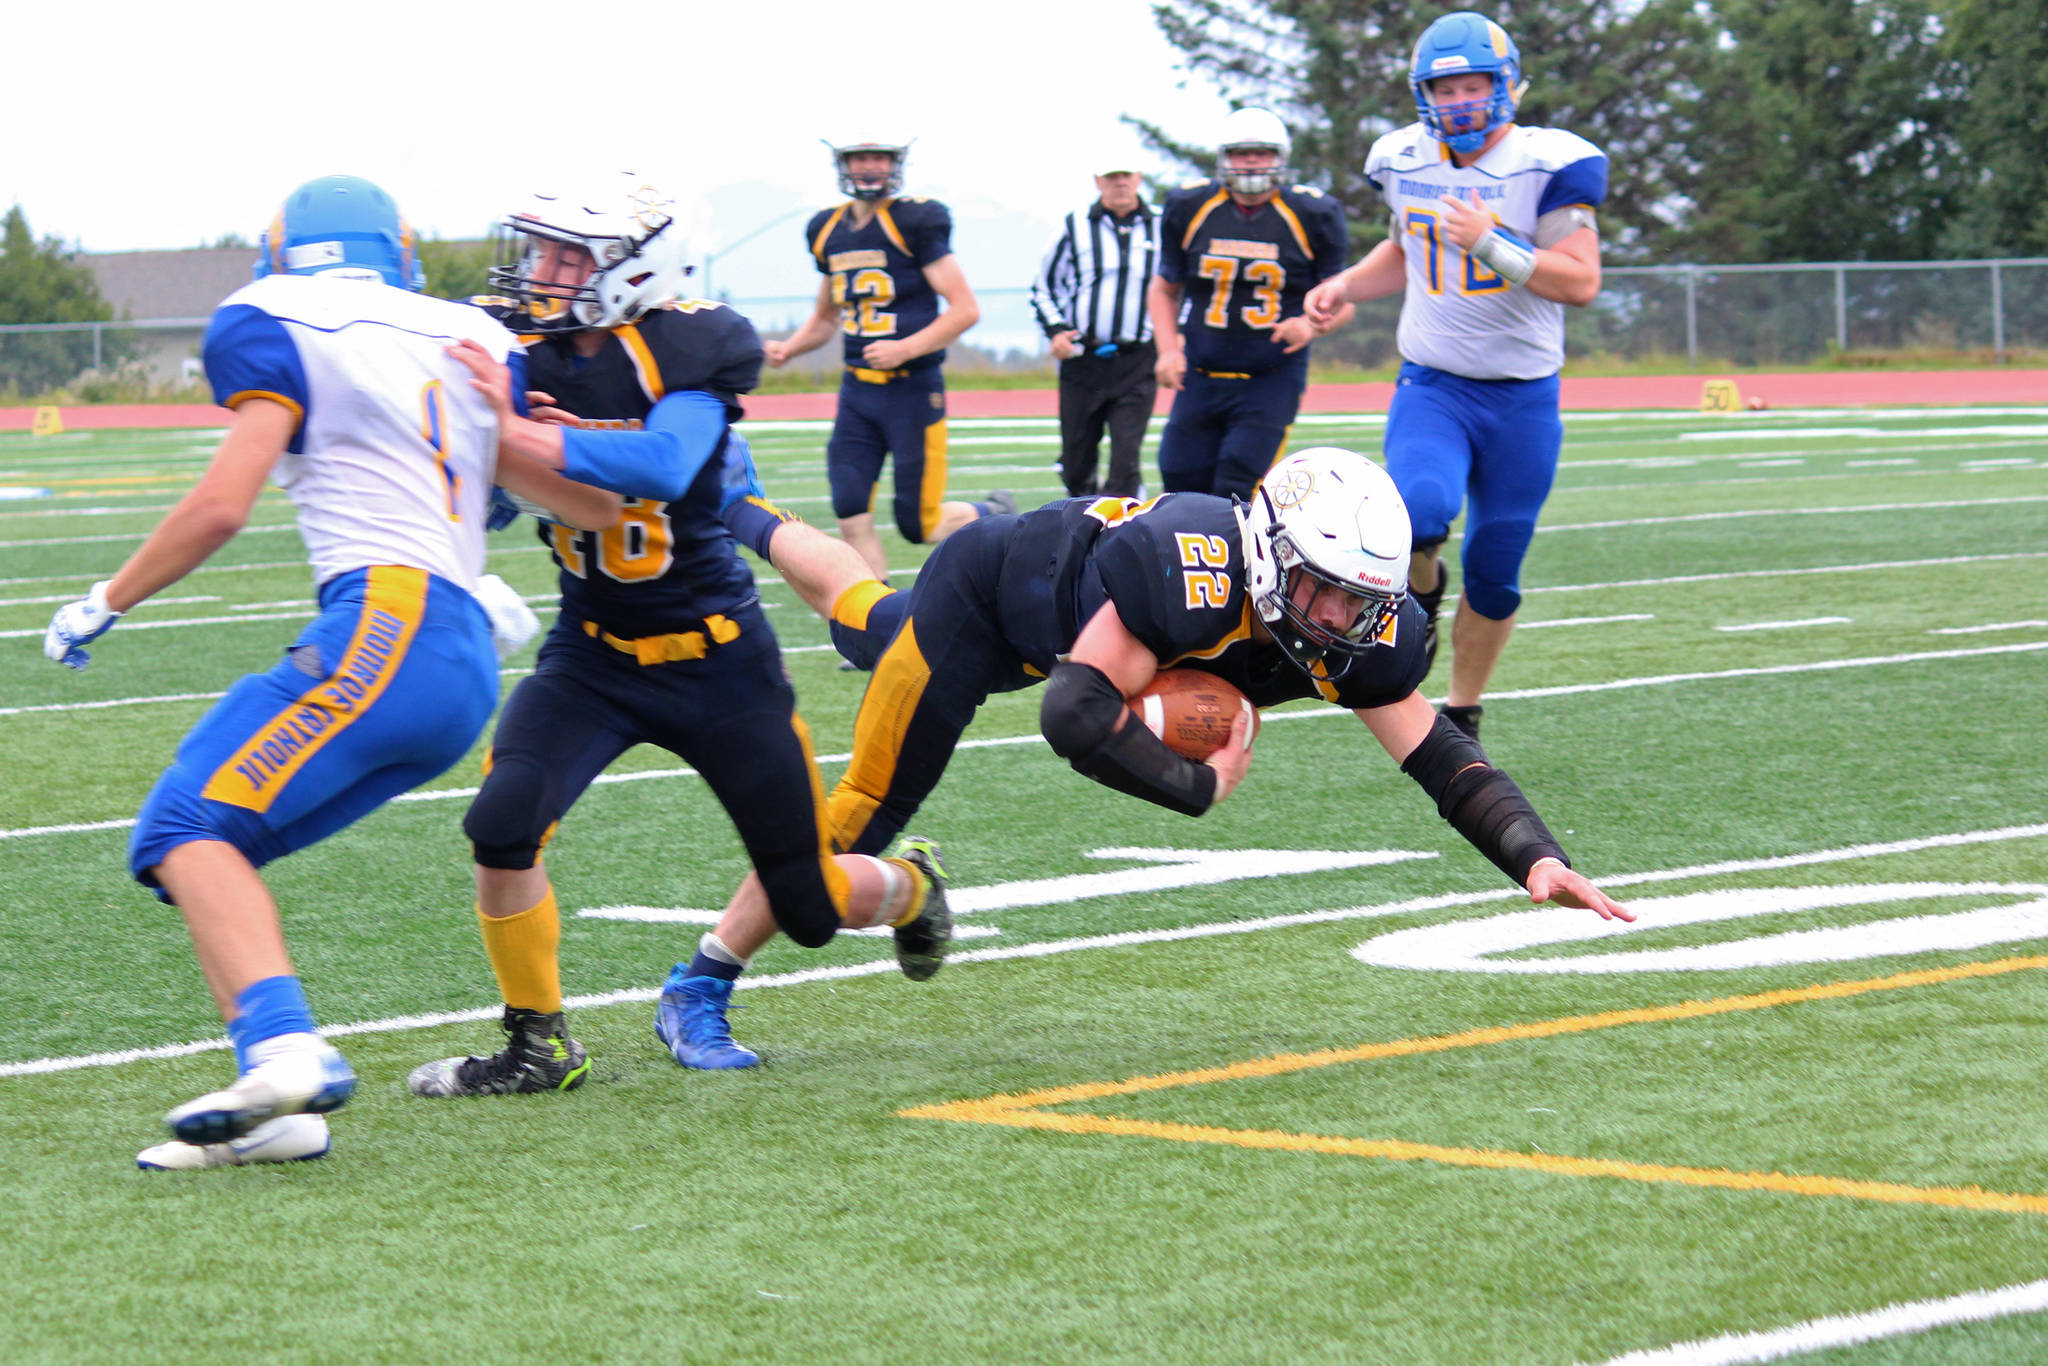 Homer junior Noah Fisk heads toward the ground after running the ball for the Mariners during their Saturday, Aug. 25, 2018 game against Monroe Catholic High School in Homer, Alaska. The Rams came out victorious, beating Homer 28-27. (Photo by Megan Pacer/Homer News)